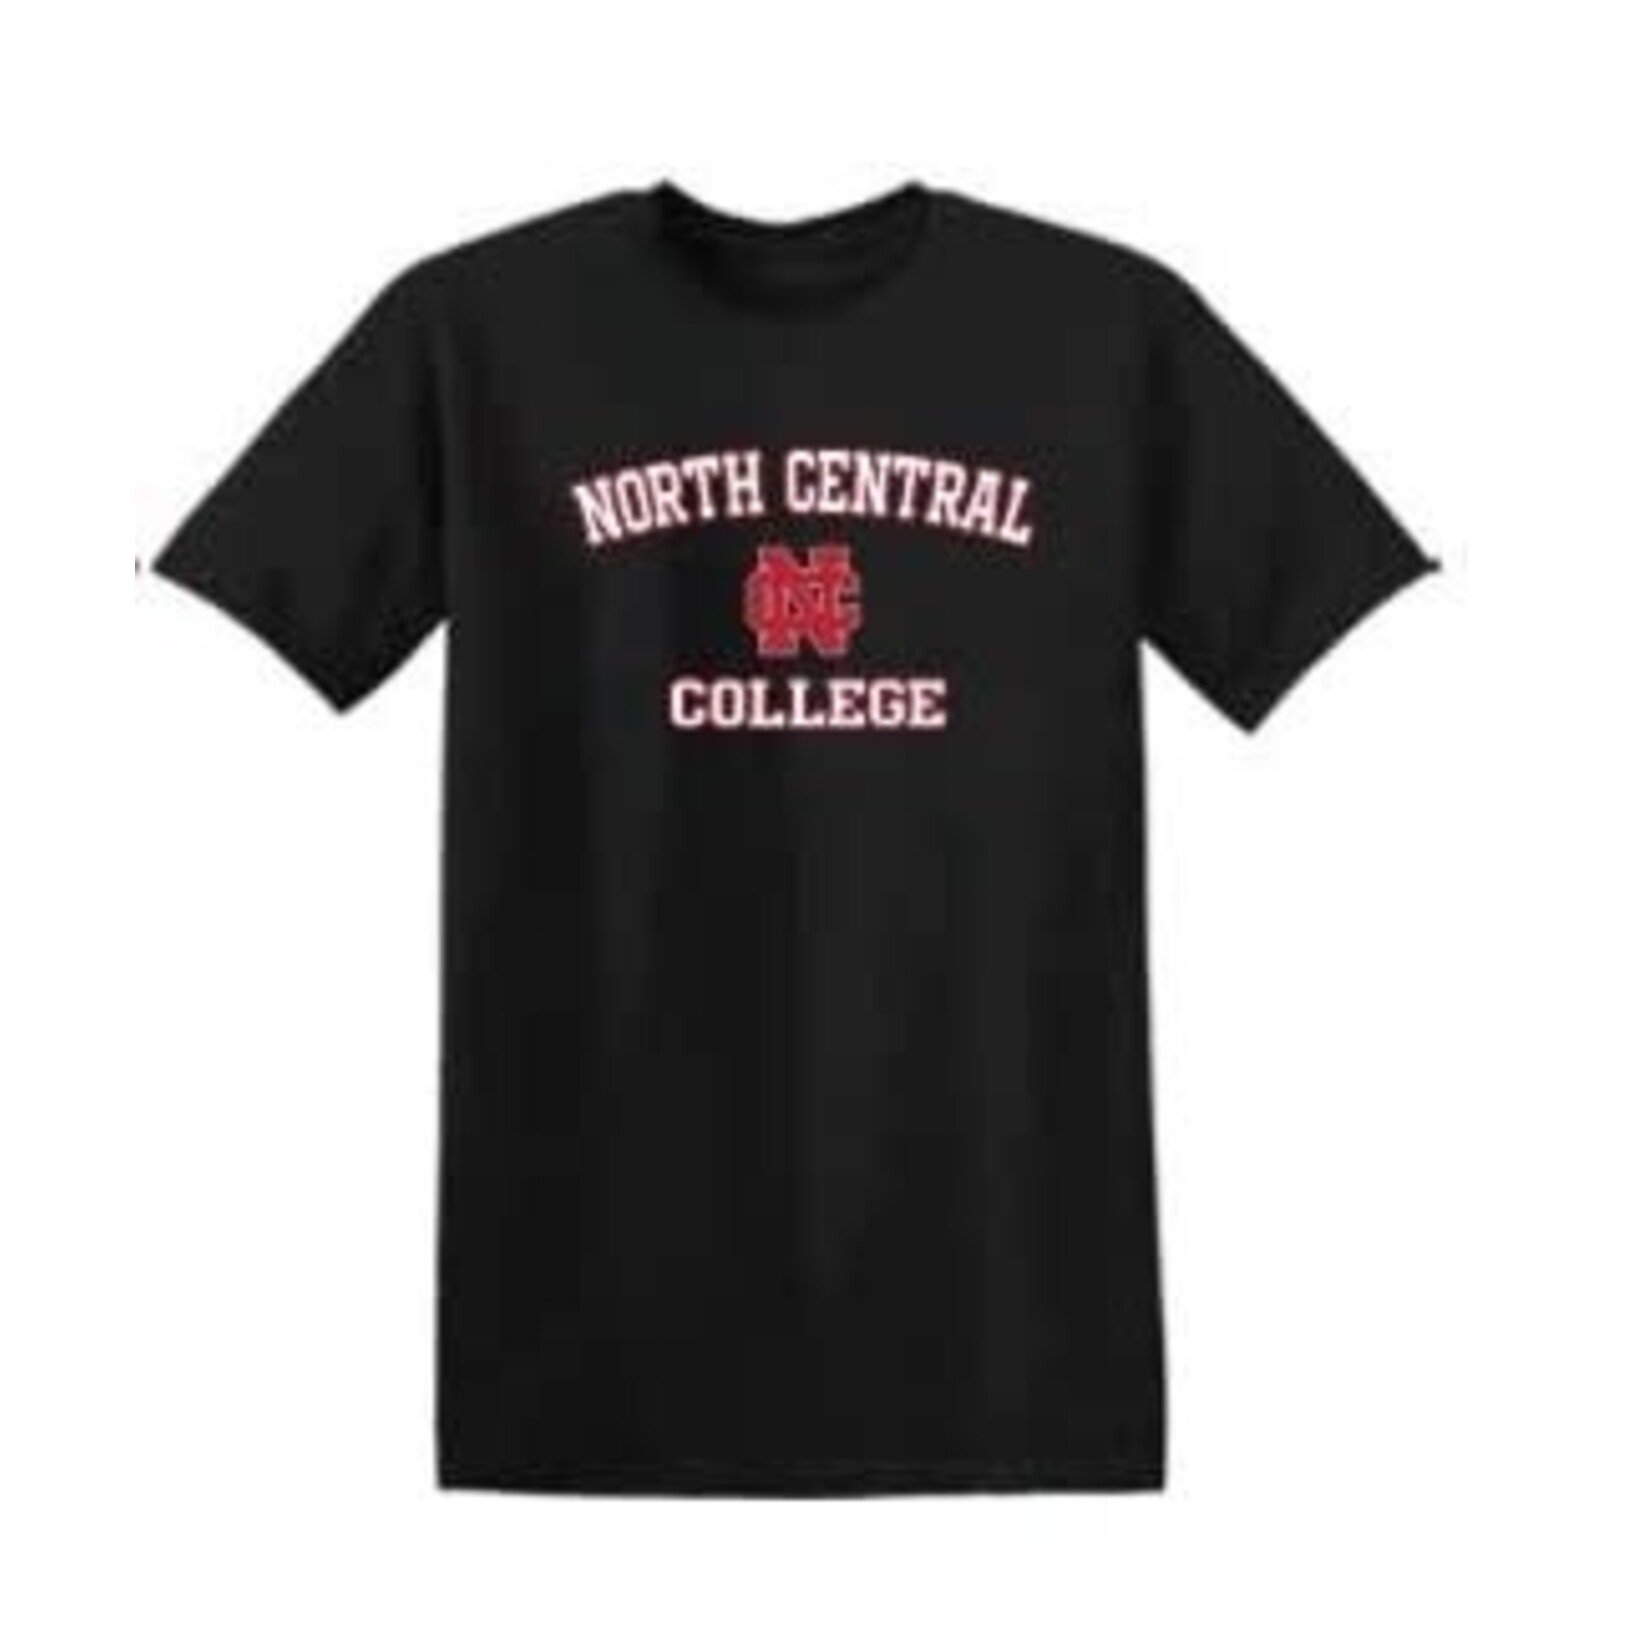 College House North Central College New Summer Tee by College House